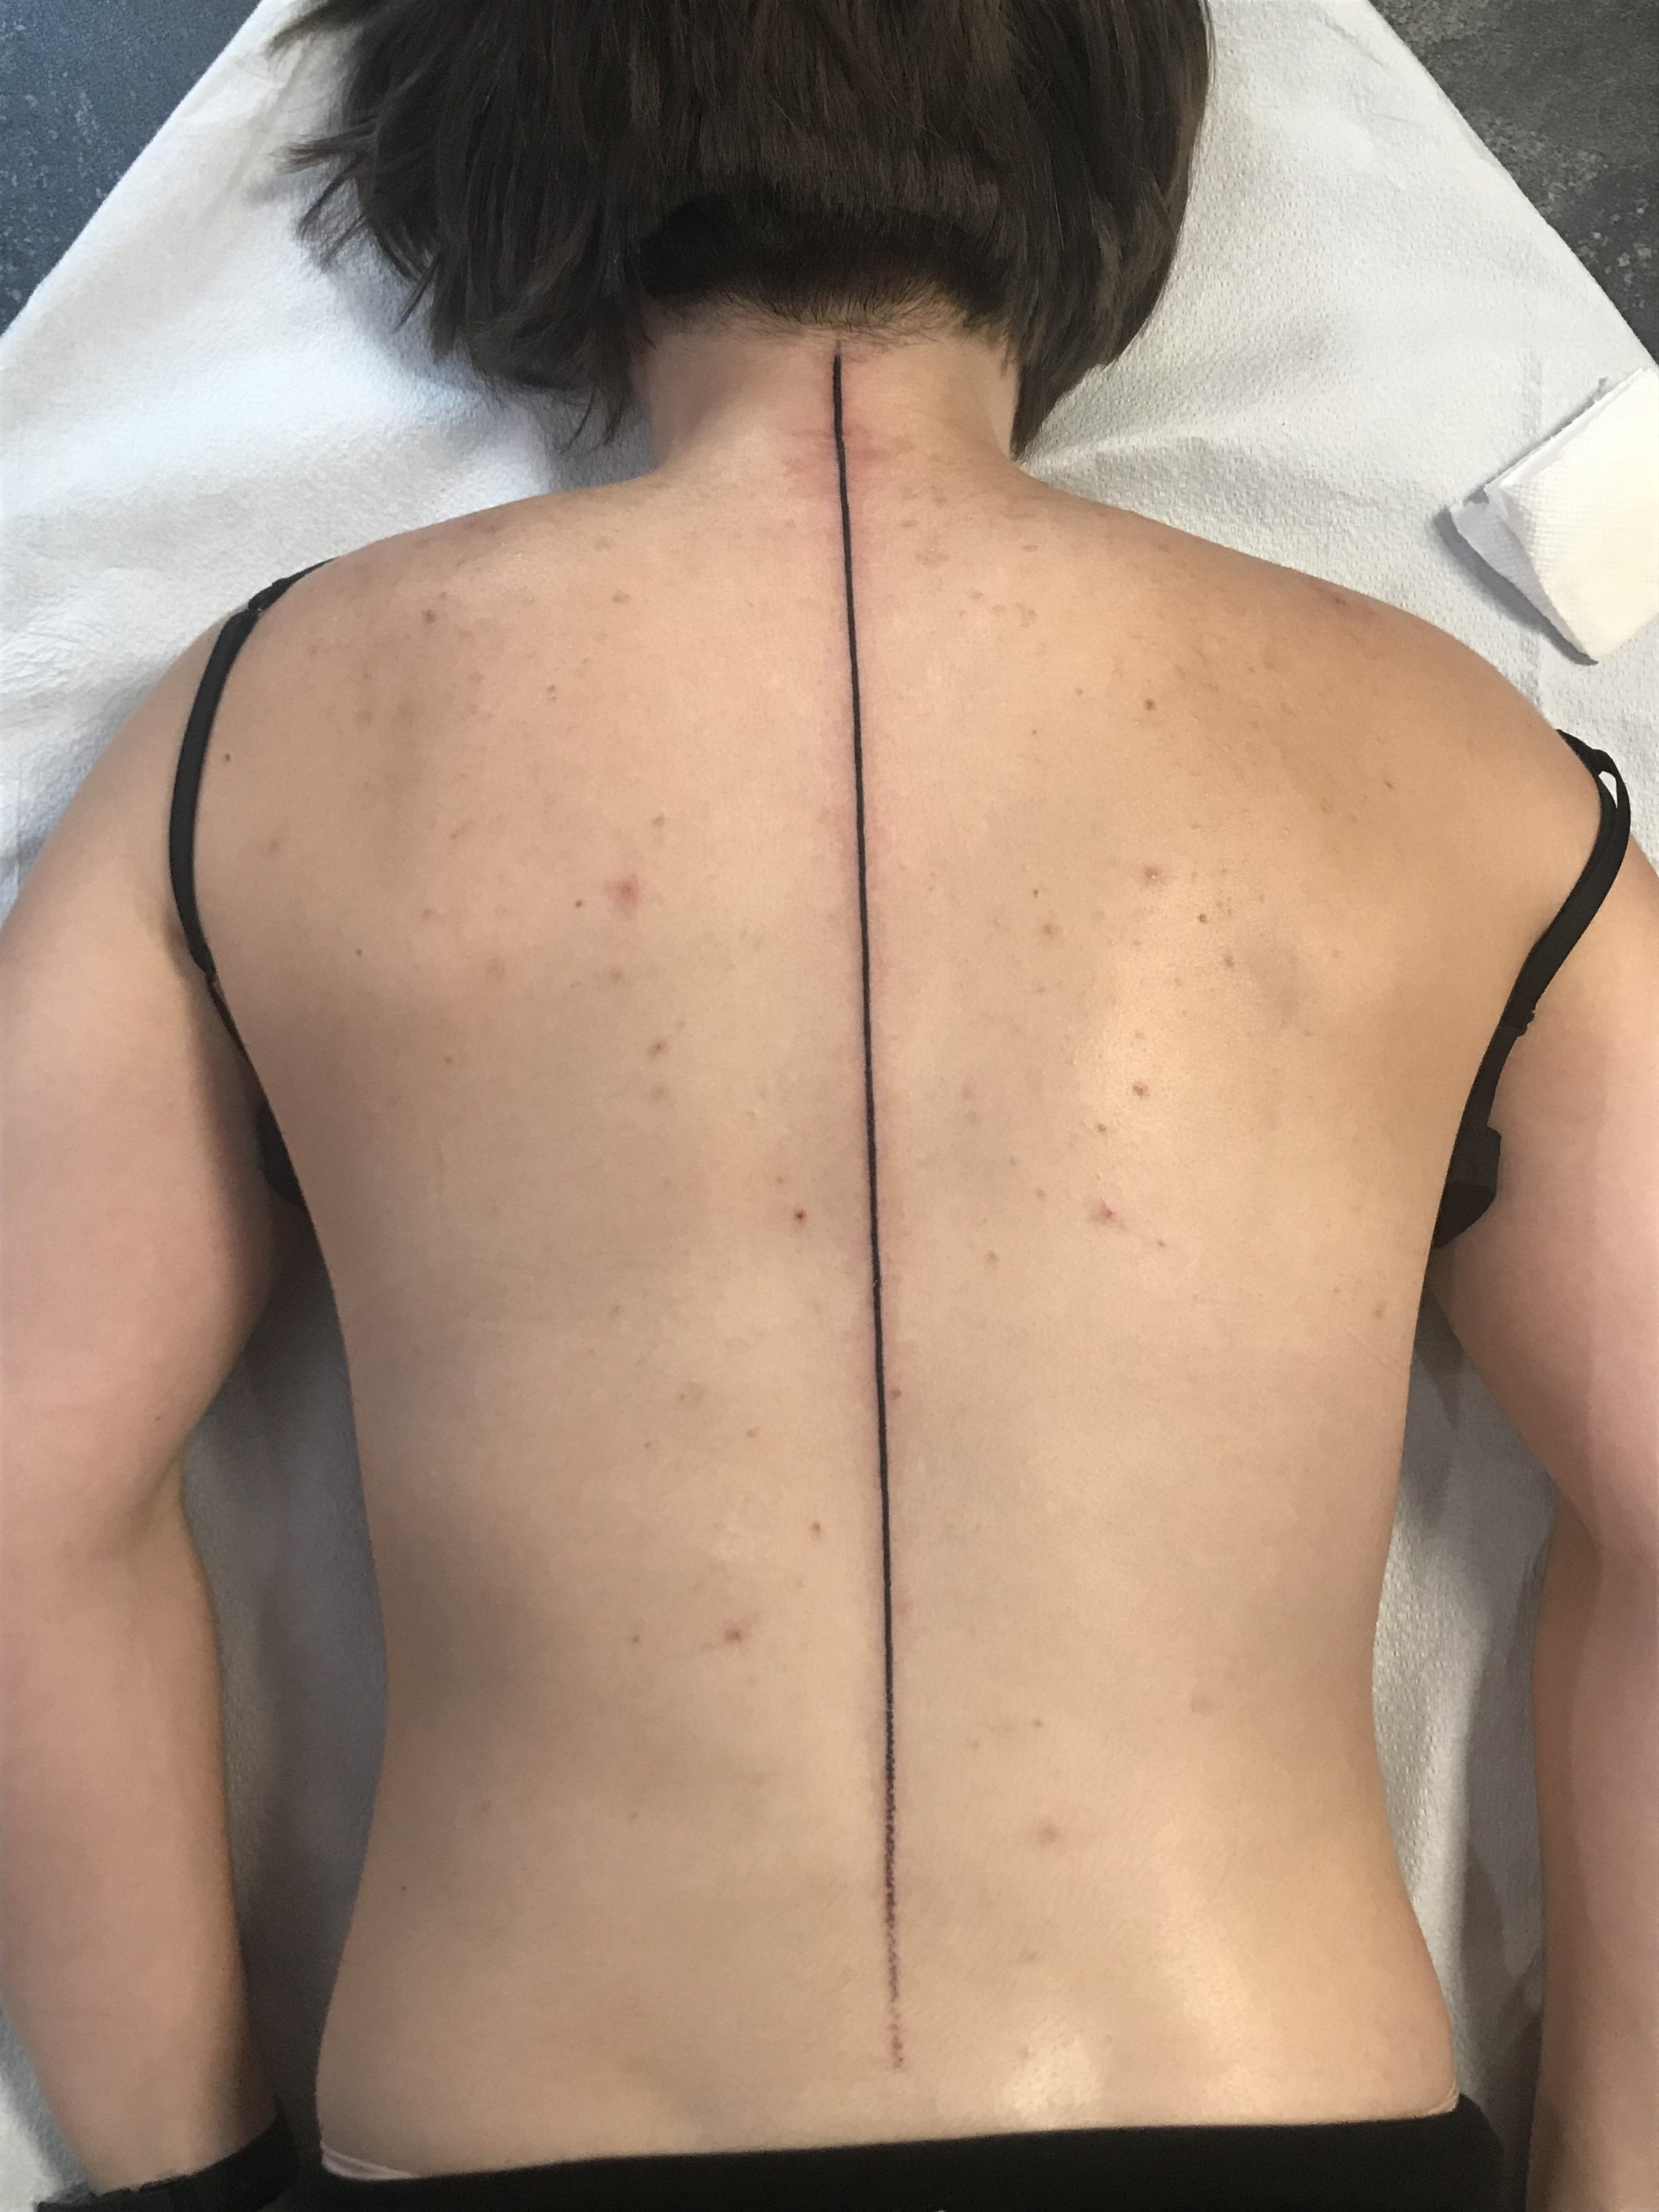 Pin on Scoliosis